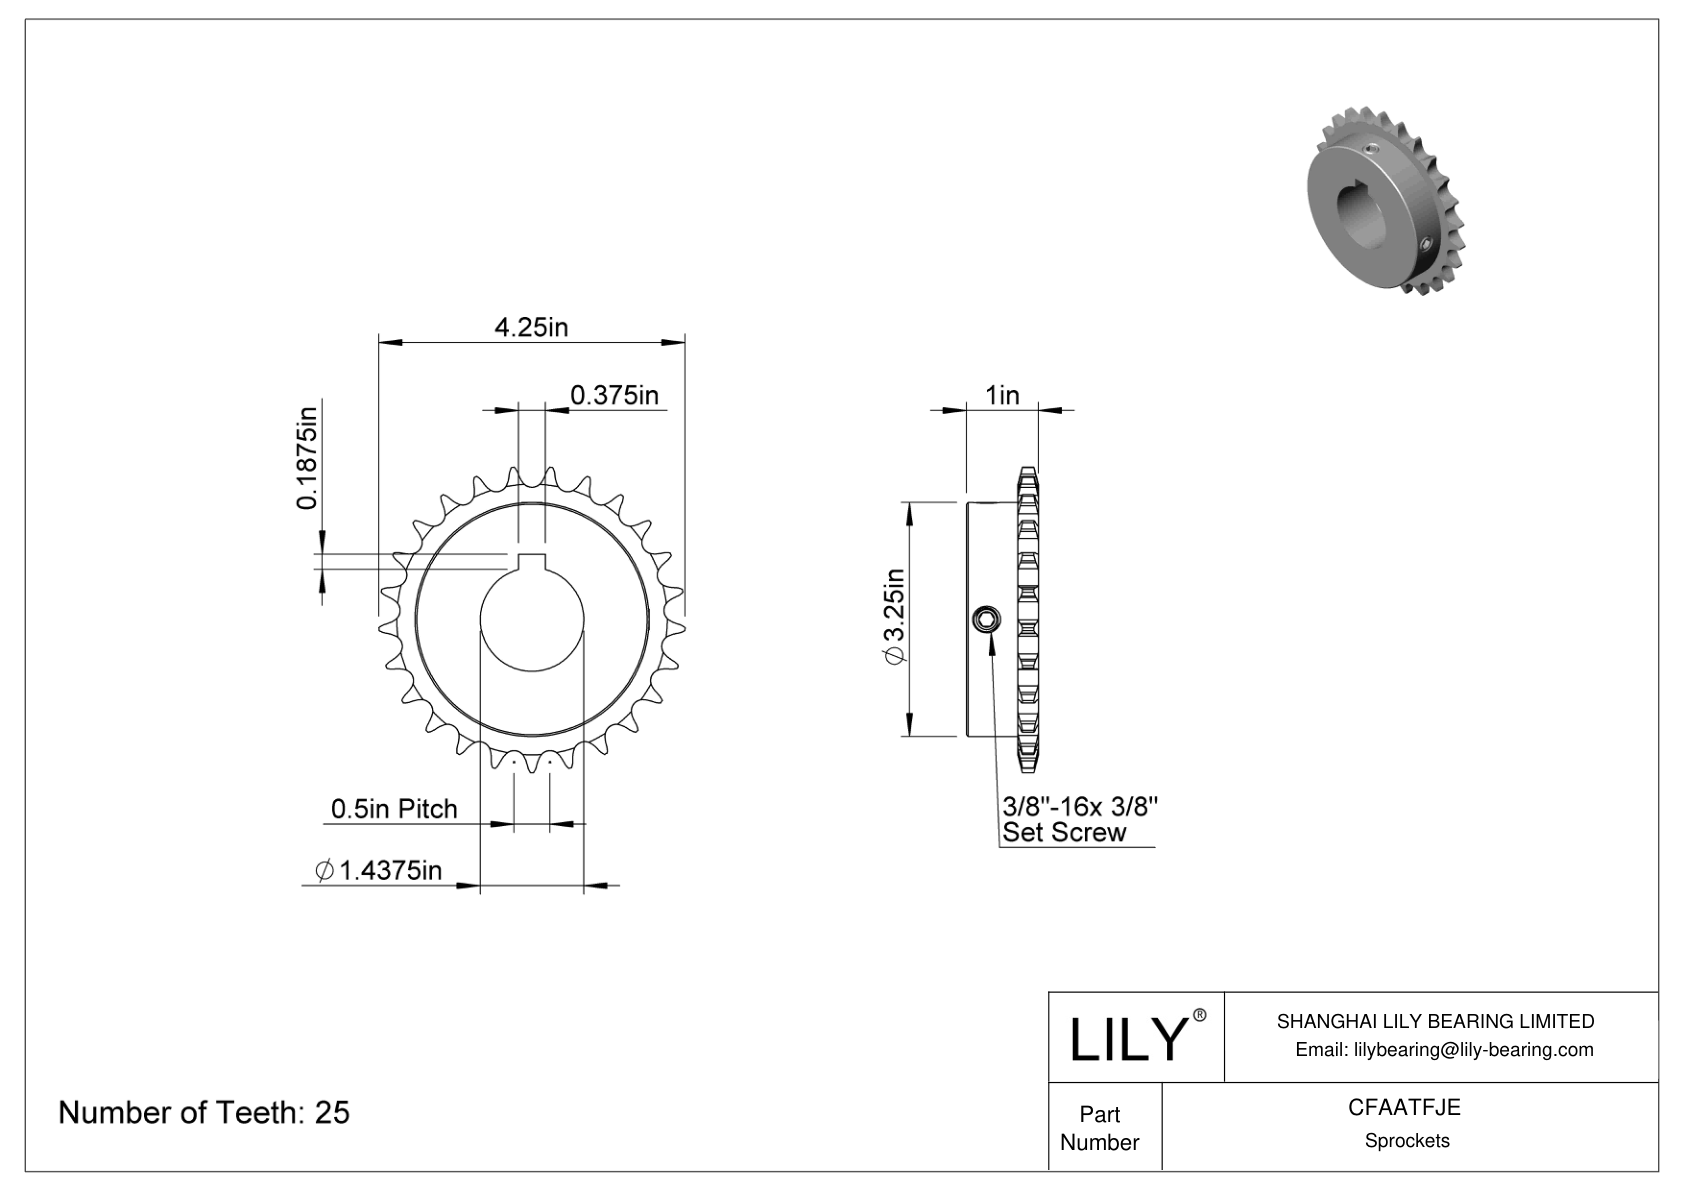 CFAATFJE Wear-Resistant Sprockets for ANSI Roller Chain cad drawing